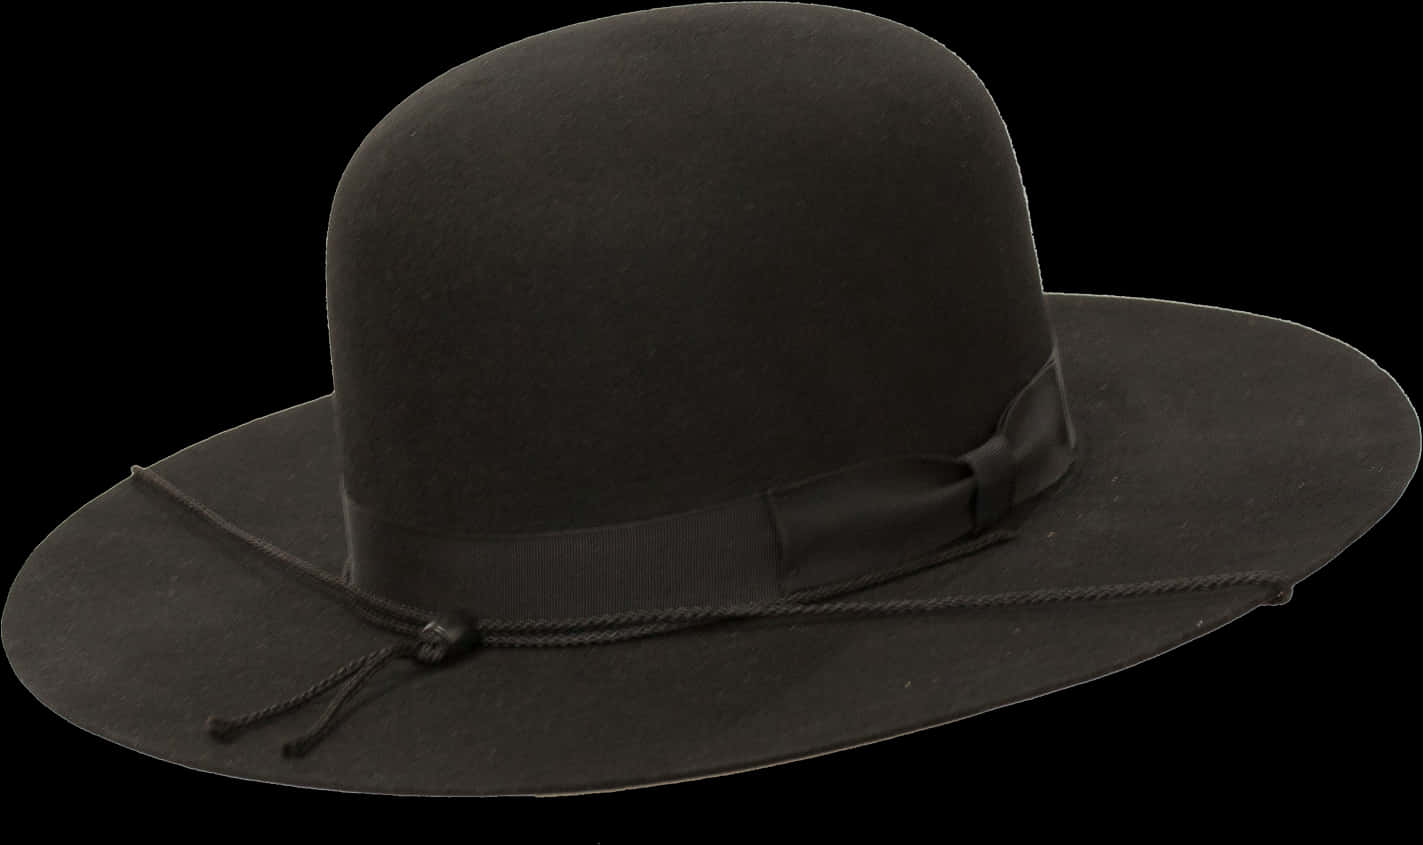 A Black Hat With A Bow